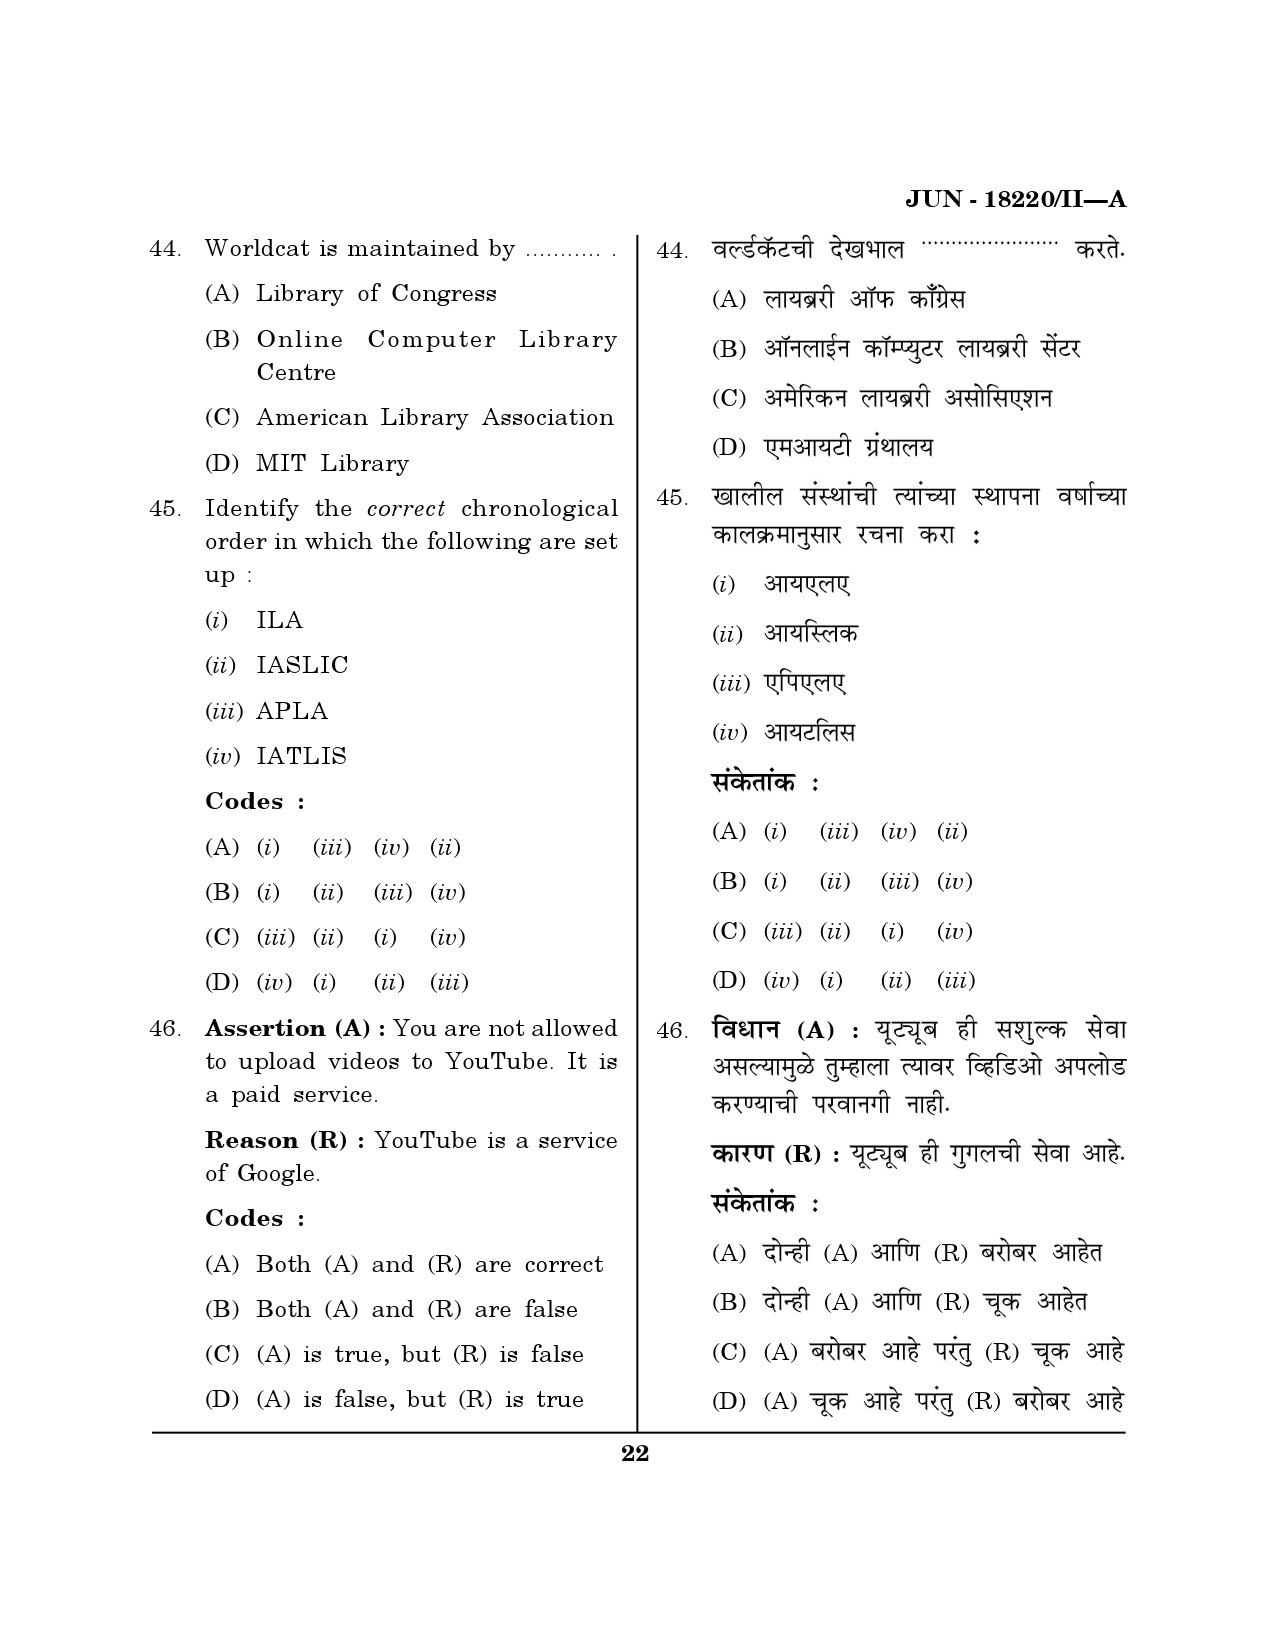 Maharashtra SET Library Information Science Question Paper II June 2020 21